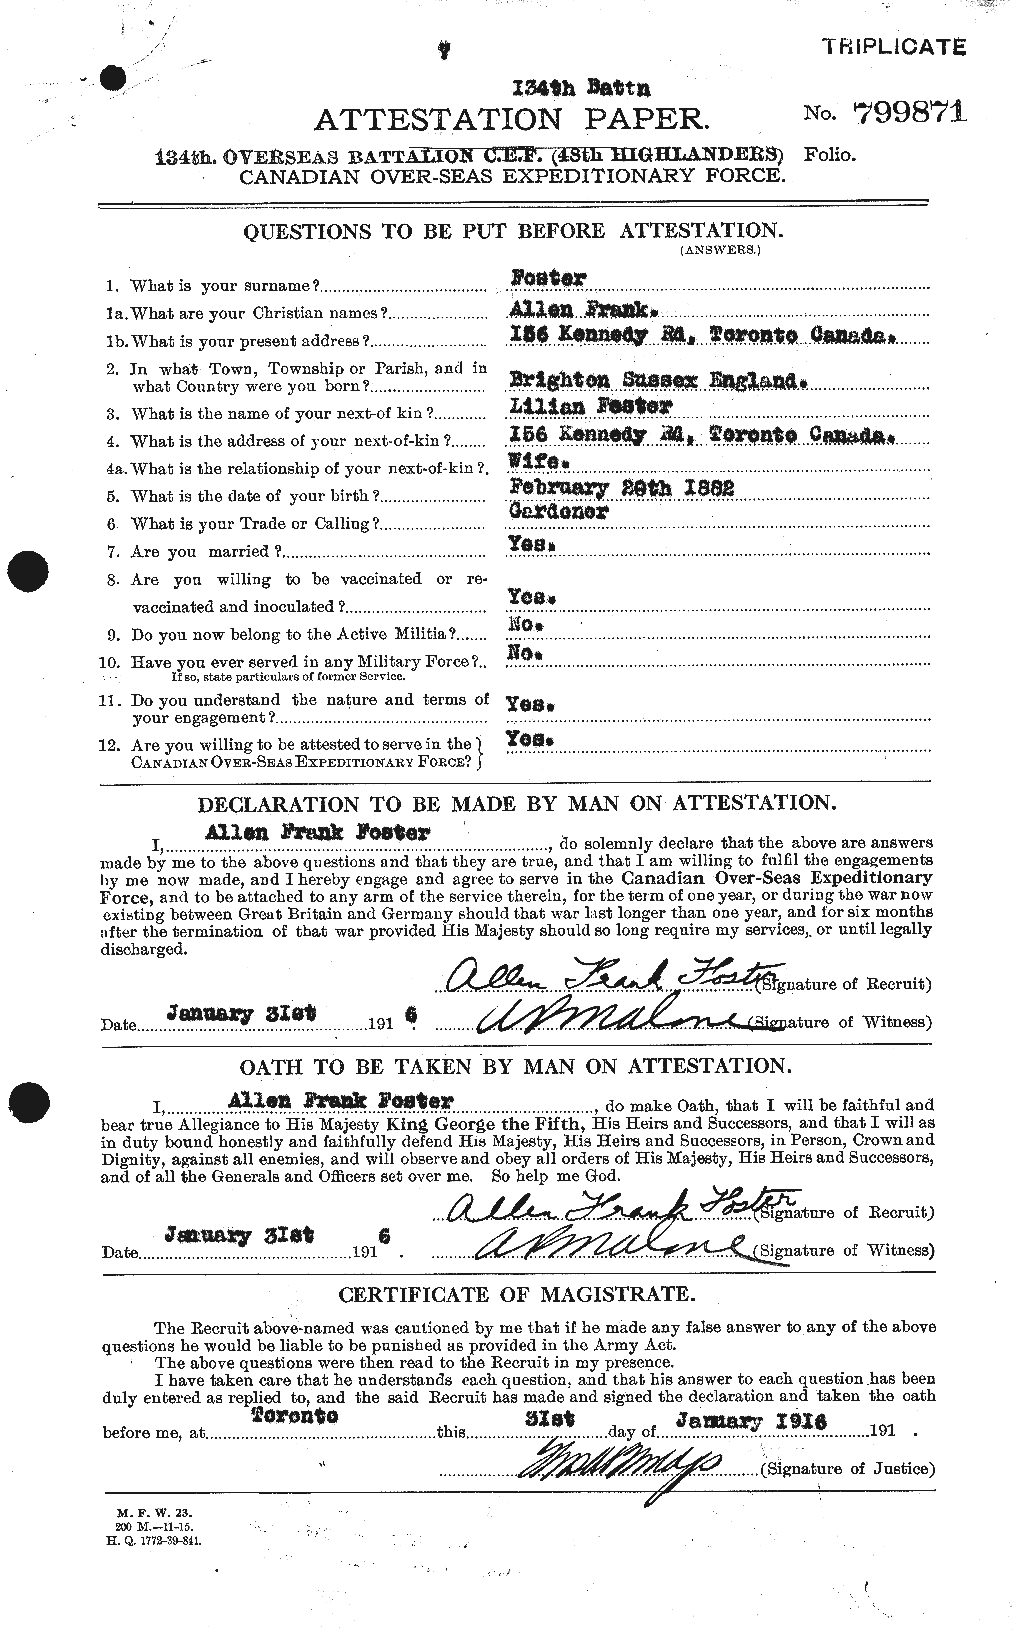 Personnel Records of the First World War - CEF 330452a